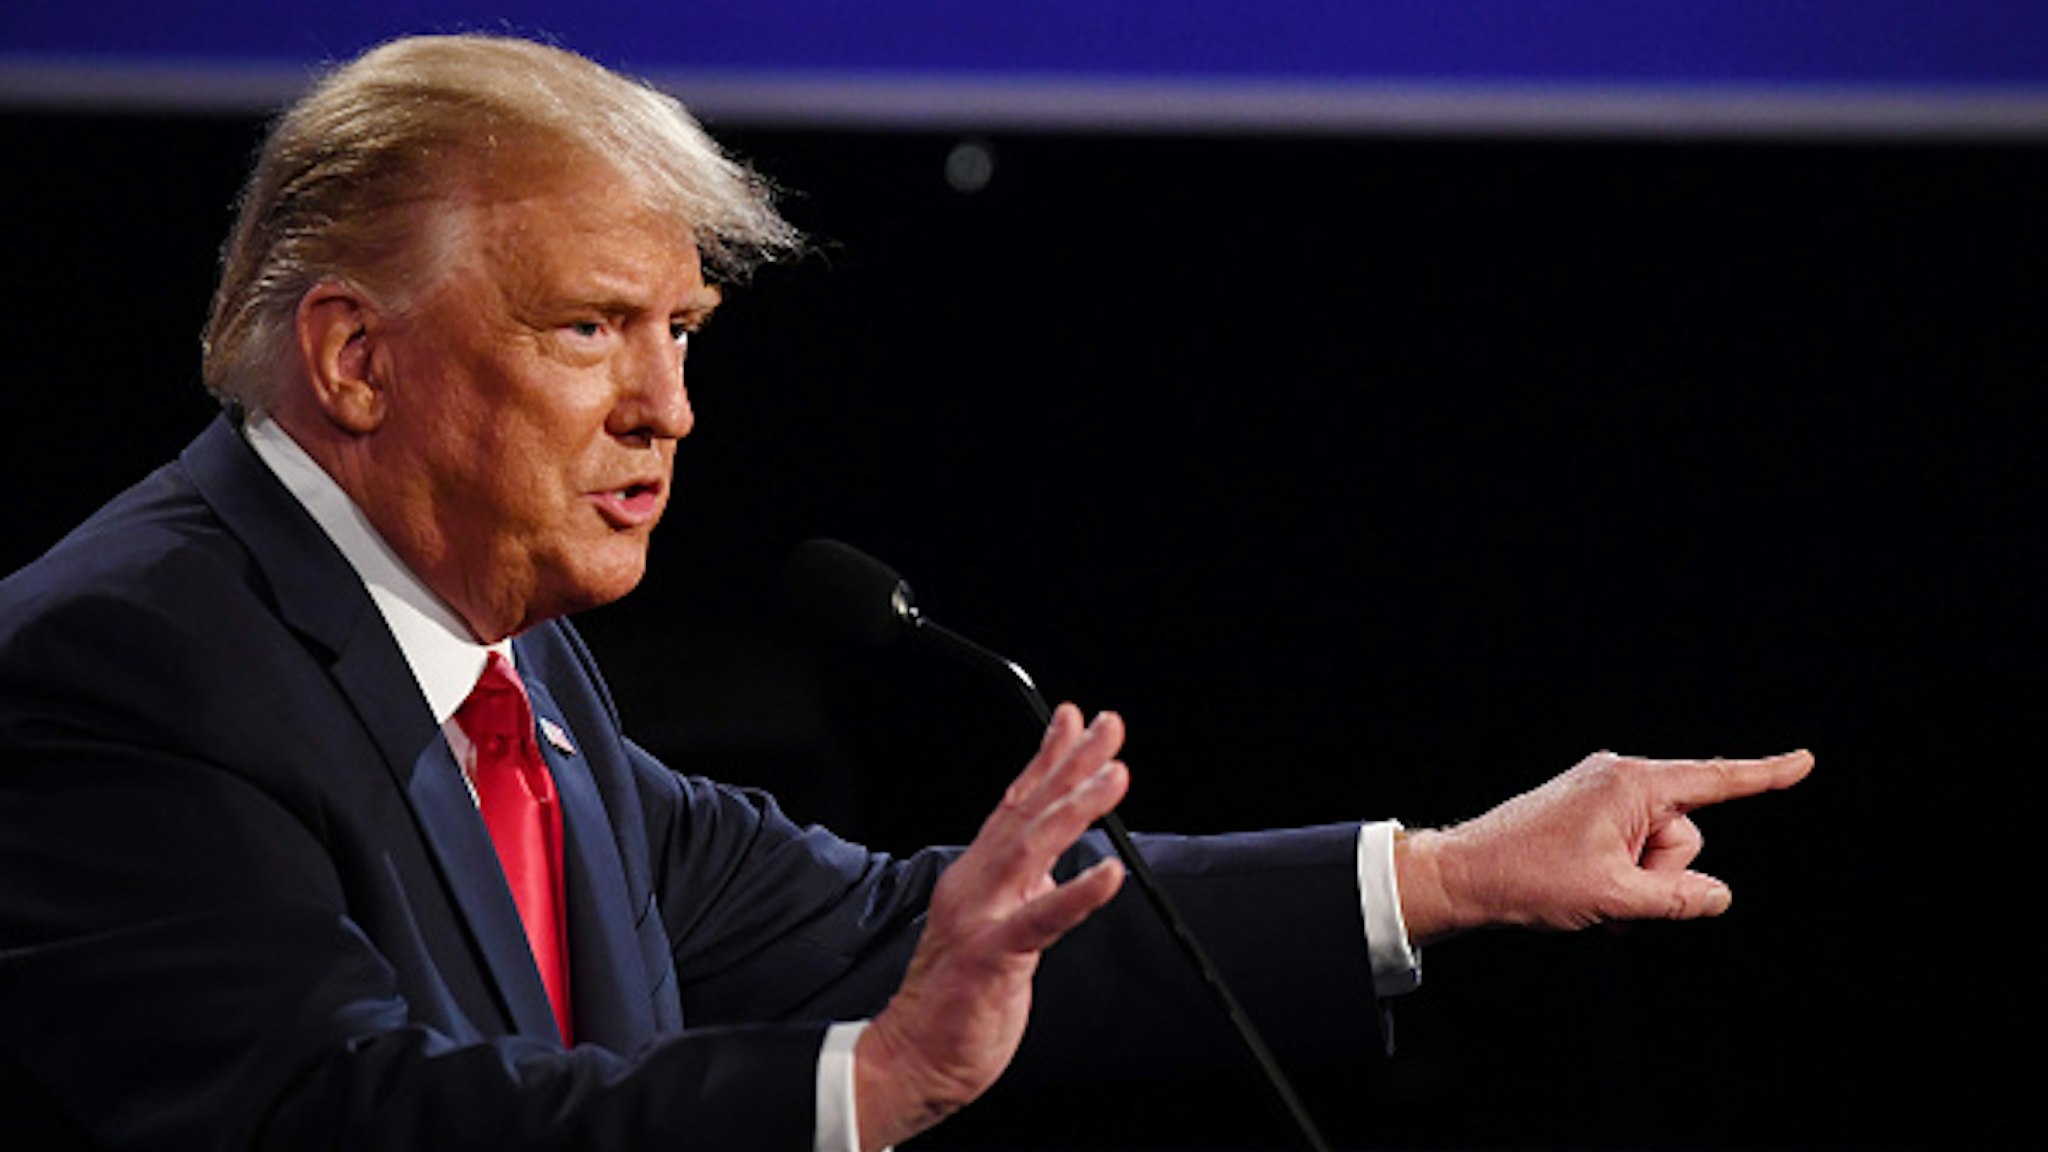 U.S. President Donald Trump speaks during the U.S. presidential debate at Belmont University in Nashville, Tennessee, U.S., on Thursday, Oct. 22, 2020. Trump and Biden traded charges of secretly taking money from foreign interests, after the former vice president addressed head-on Trumps efforts to portray him as corrupt.